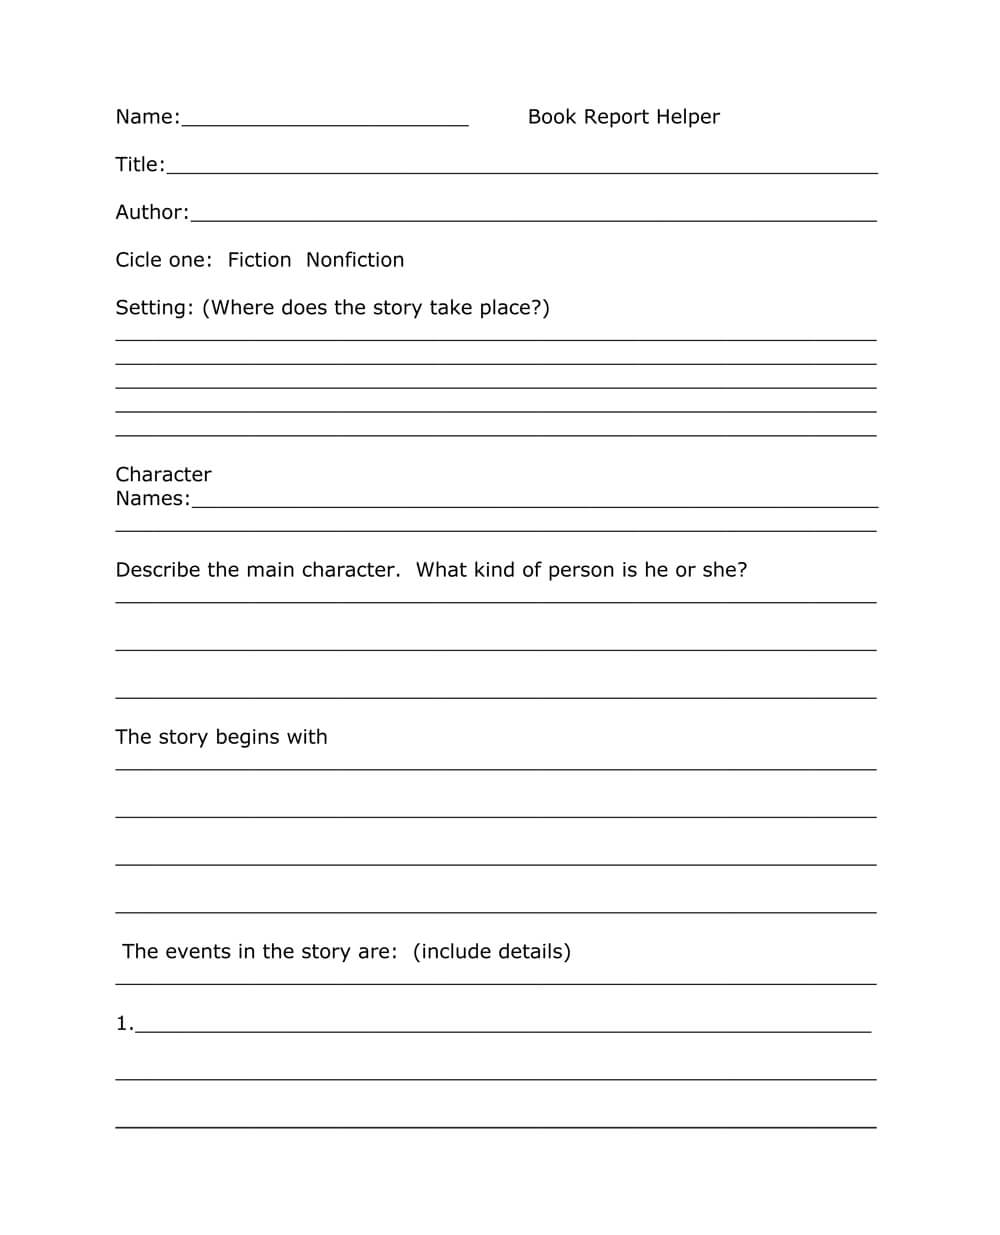 Book Report Templates From Custom Writing Service Regarding Story Report Template